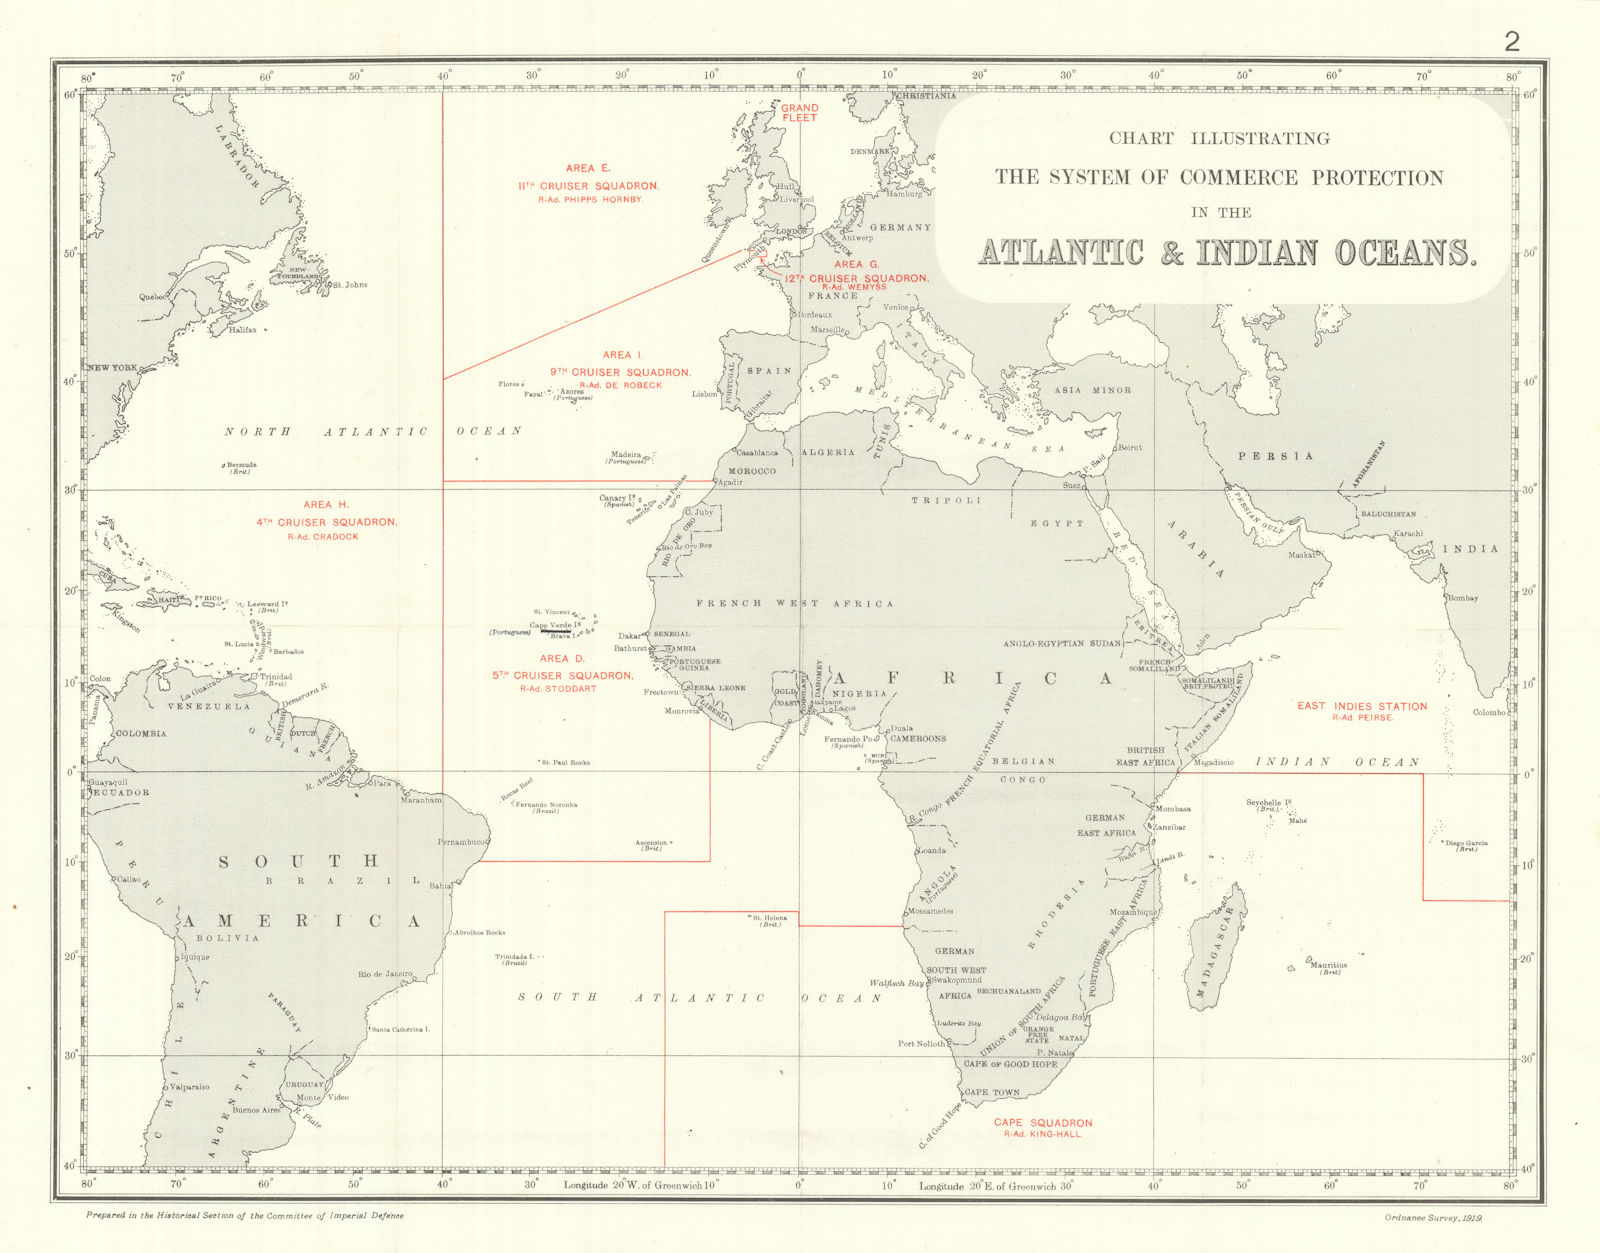 Commerce Protection in Atlantic & Indian Oceans 1914. First World War. 1920 map